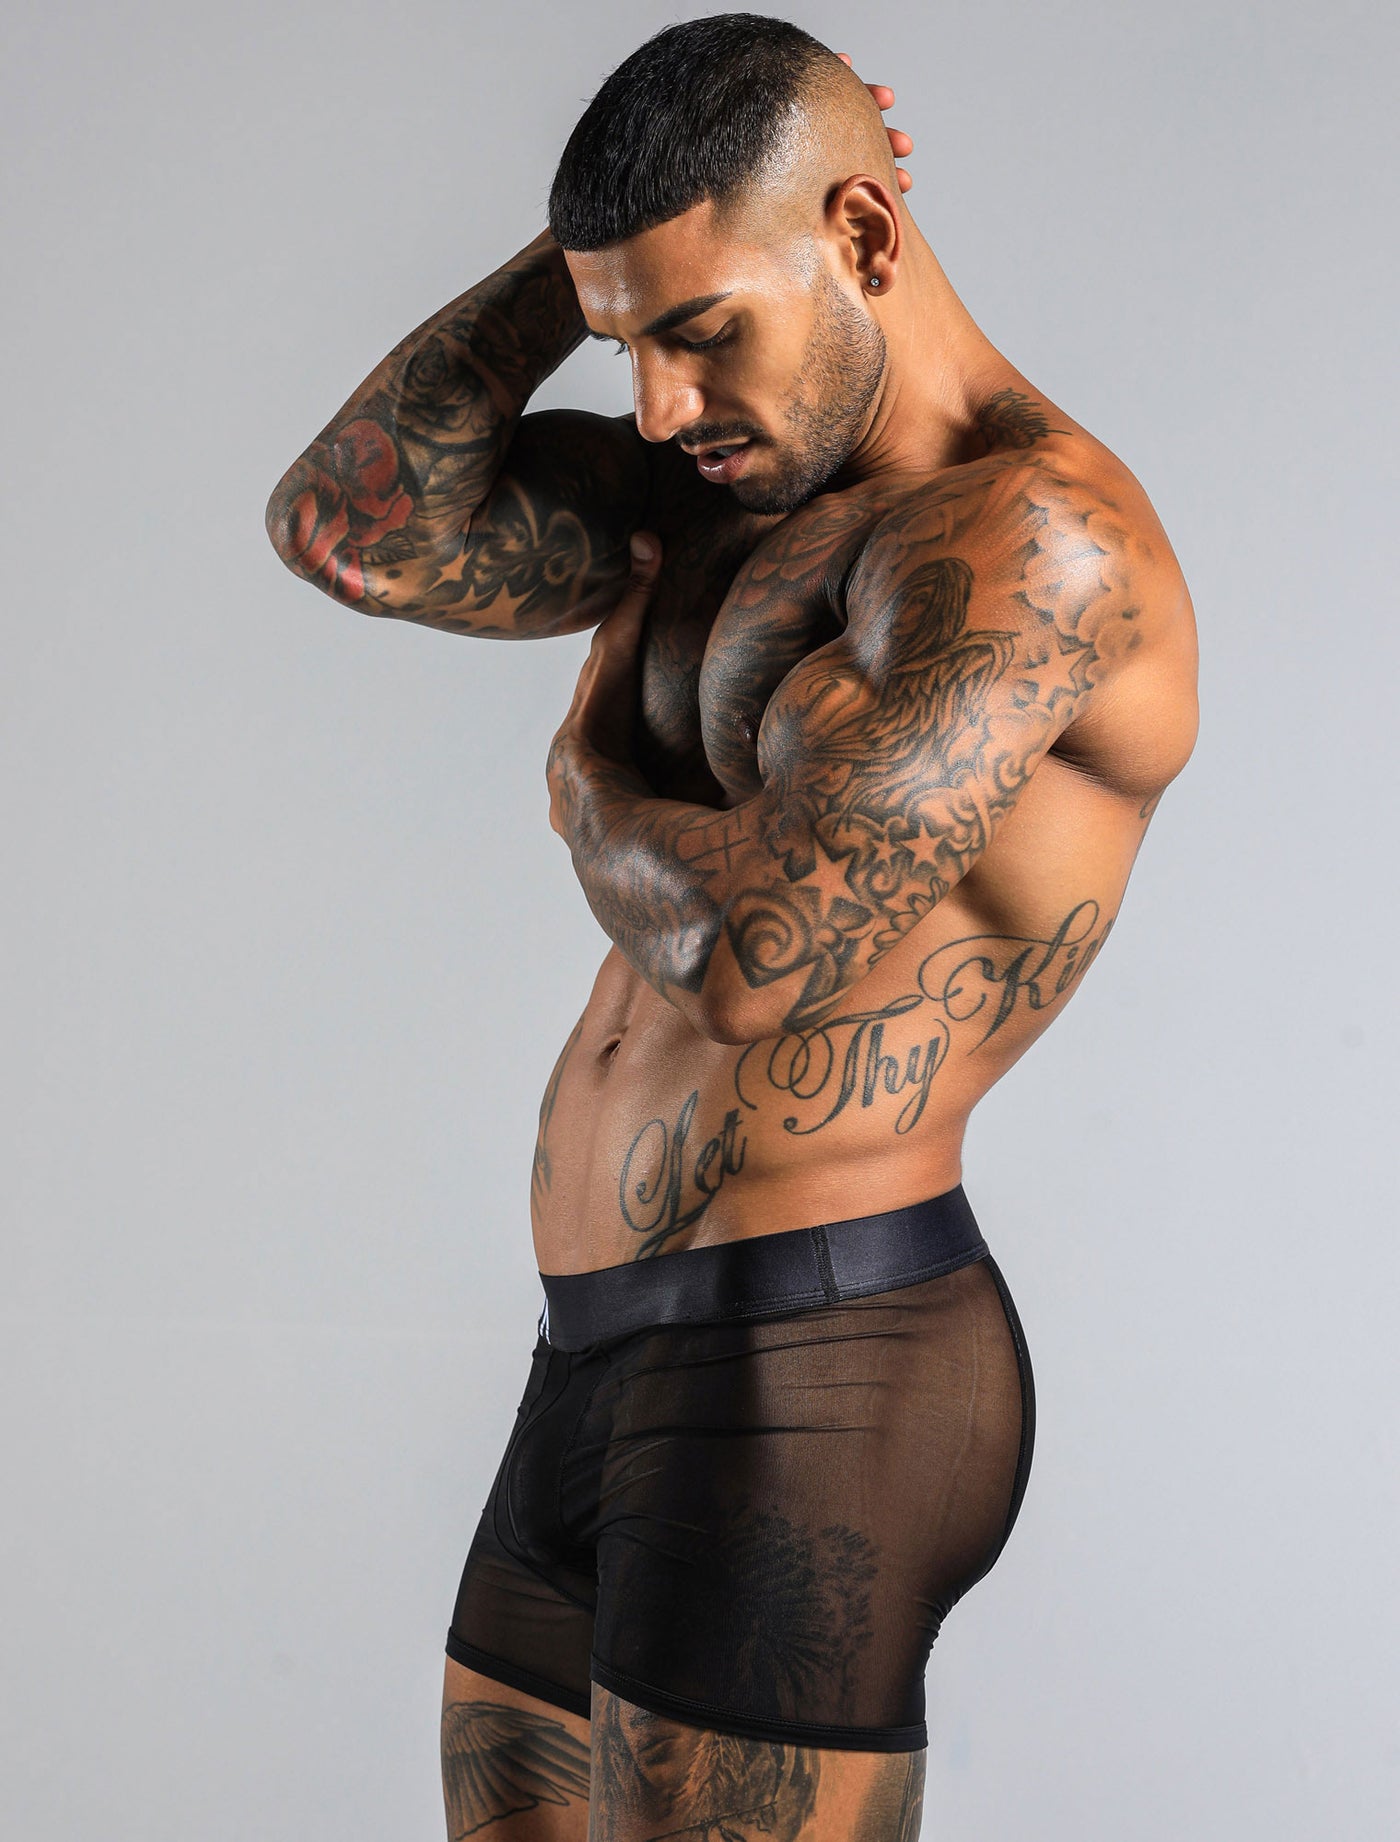 All Over Mesh Boxers - Black